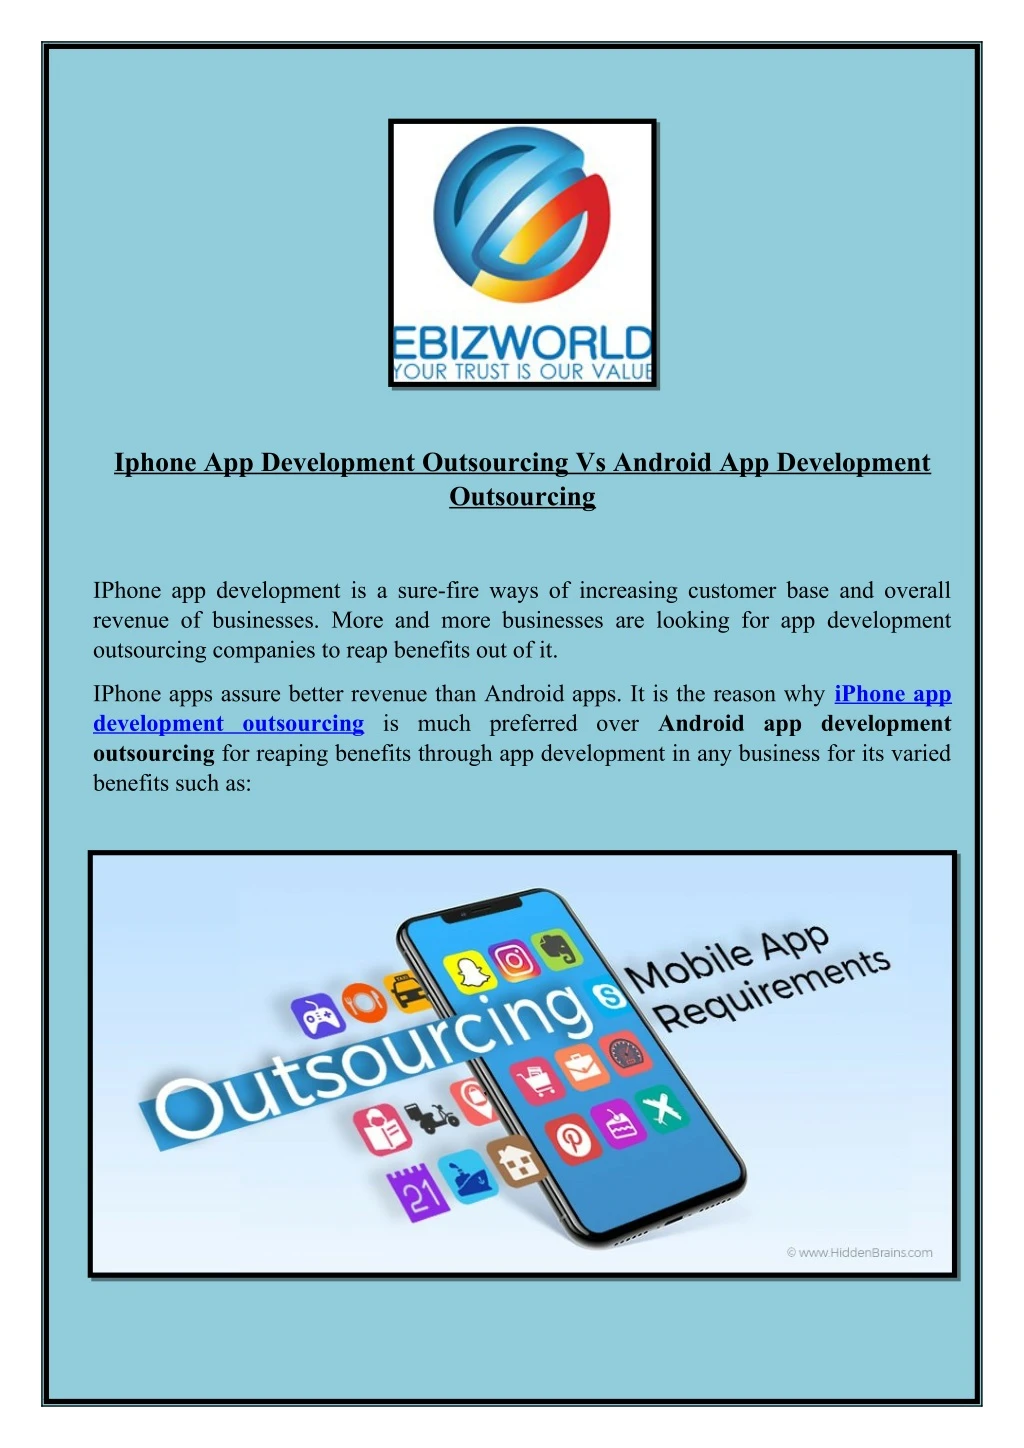 iphone app development outsourcing vs android